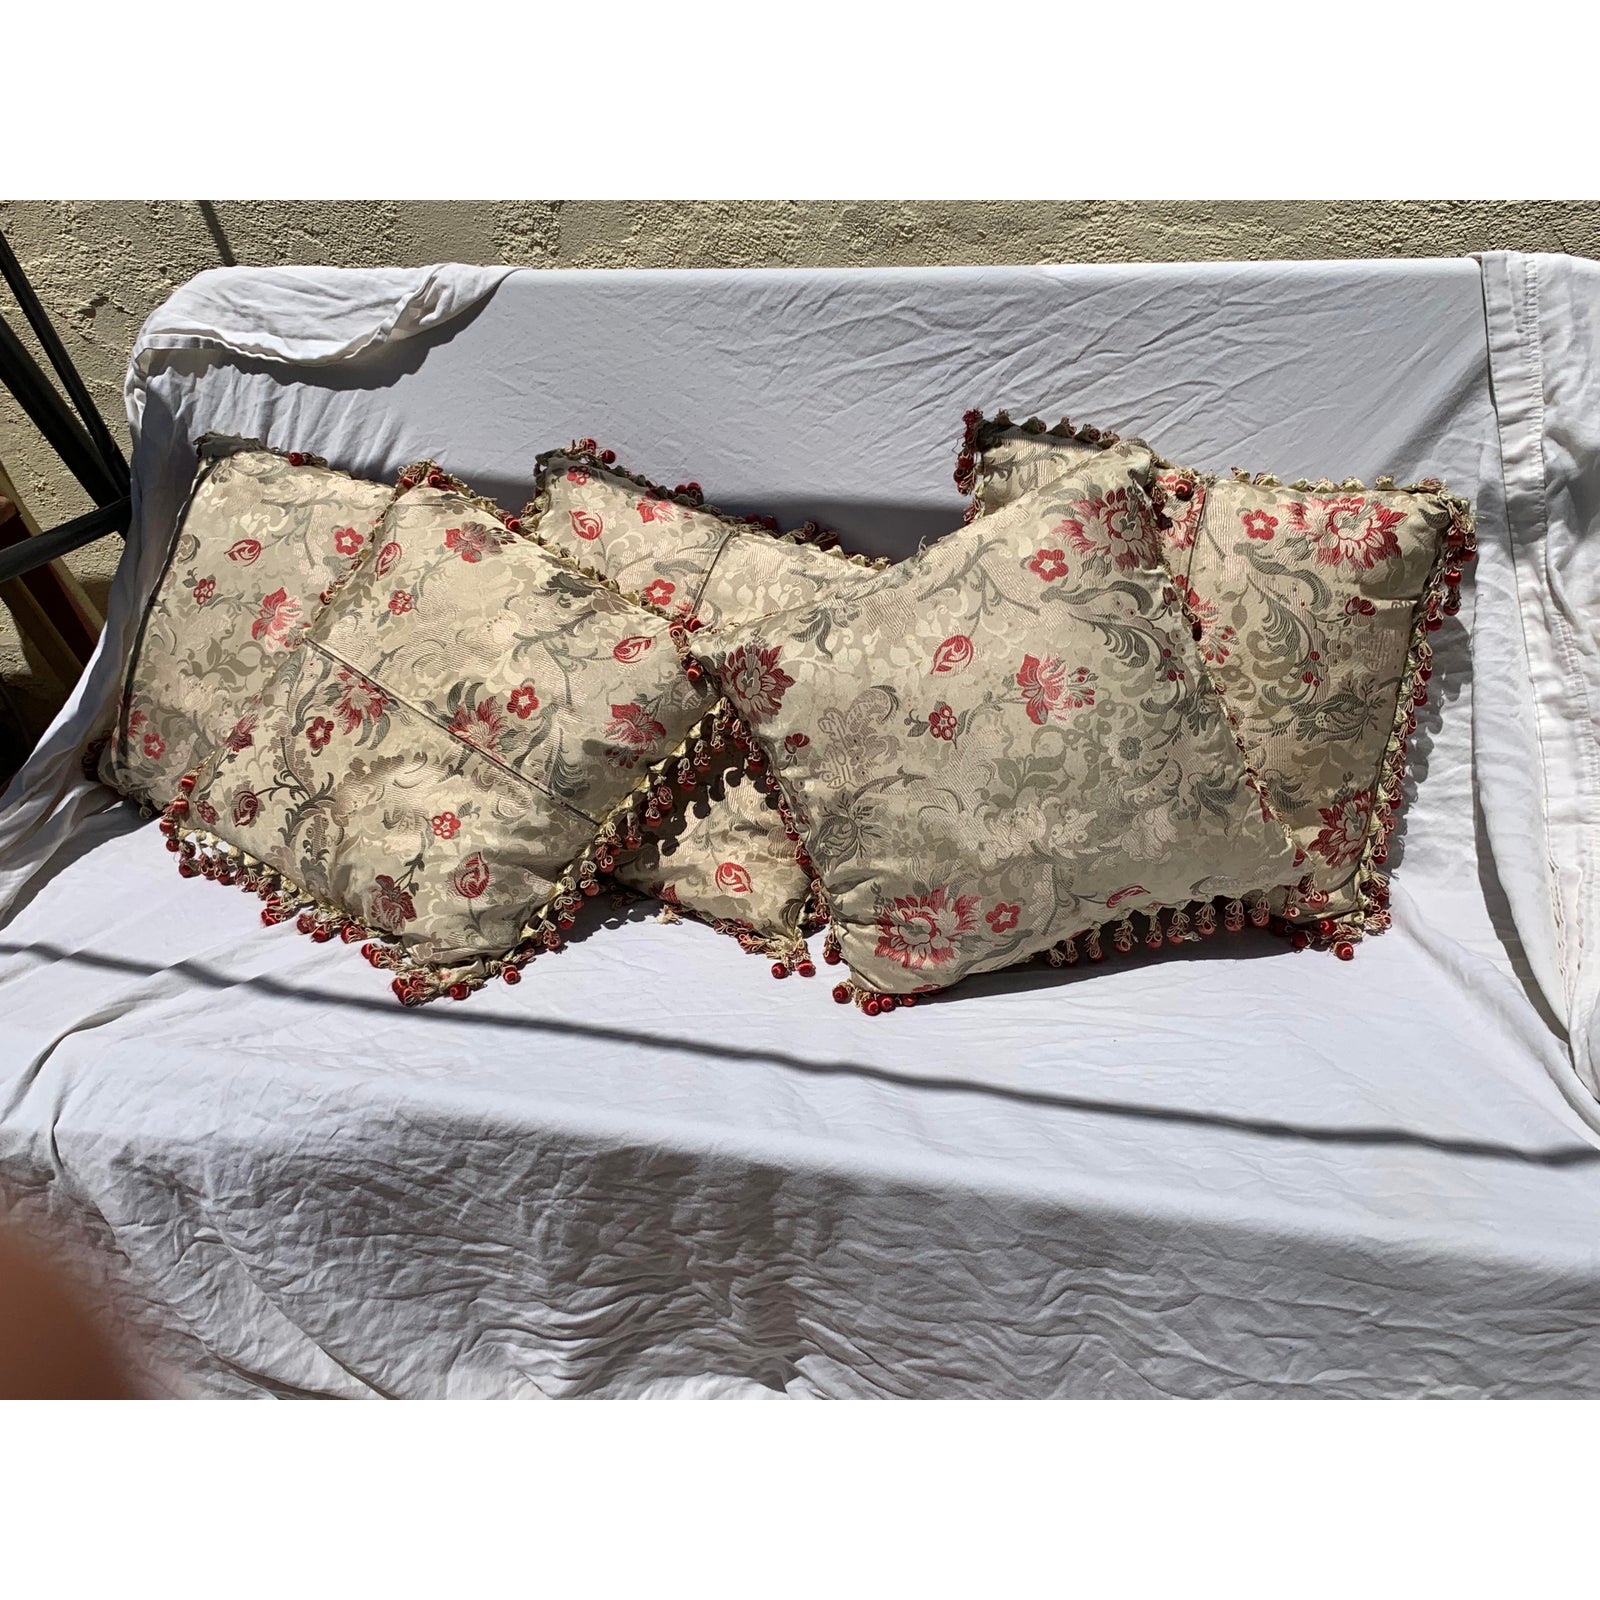 vintage-floral-classical-pillows-set-of-5-8069